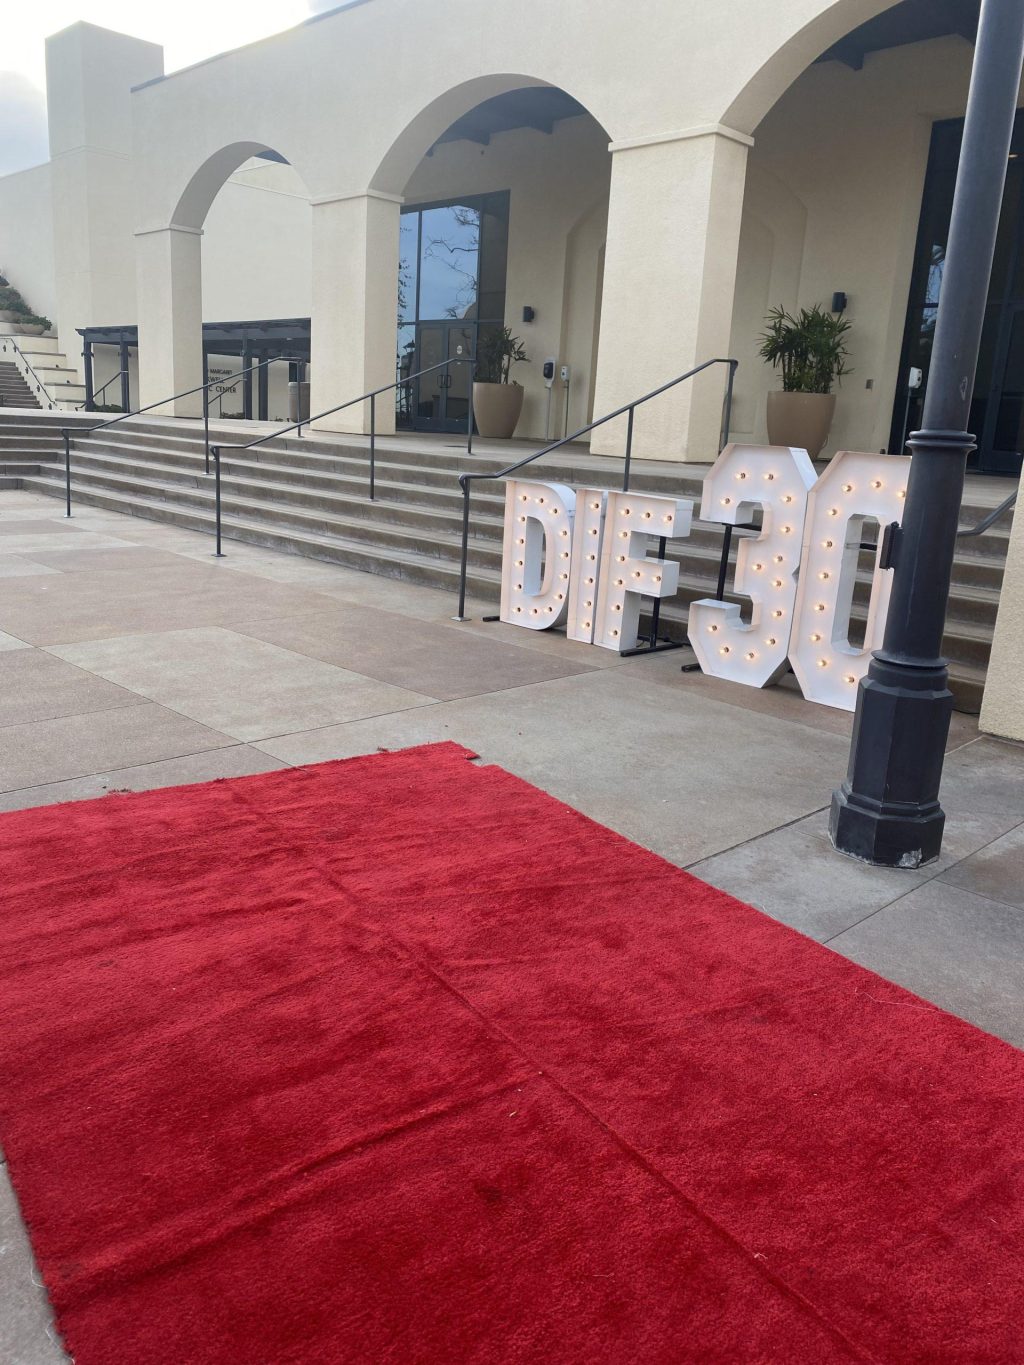 Alumni celebrate the DIF 30th anniversary by gathering on a red carpet at Lower Mullins, before watching the DIF film March 16. The company produced the film in 2013, Price said.